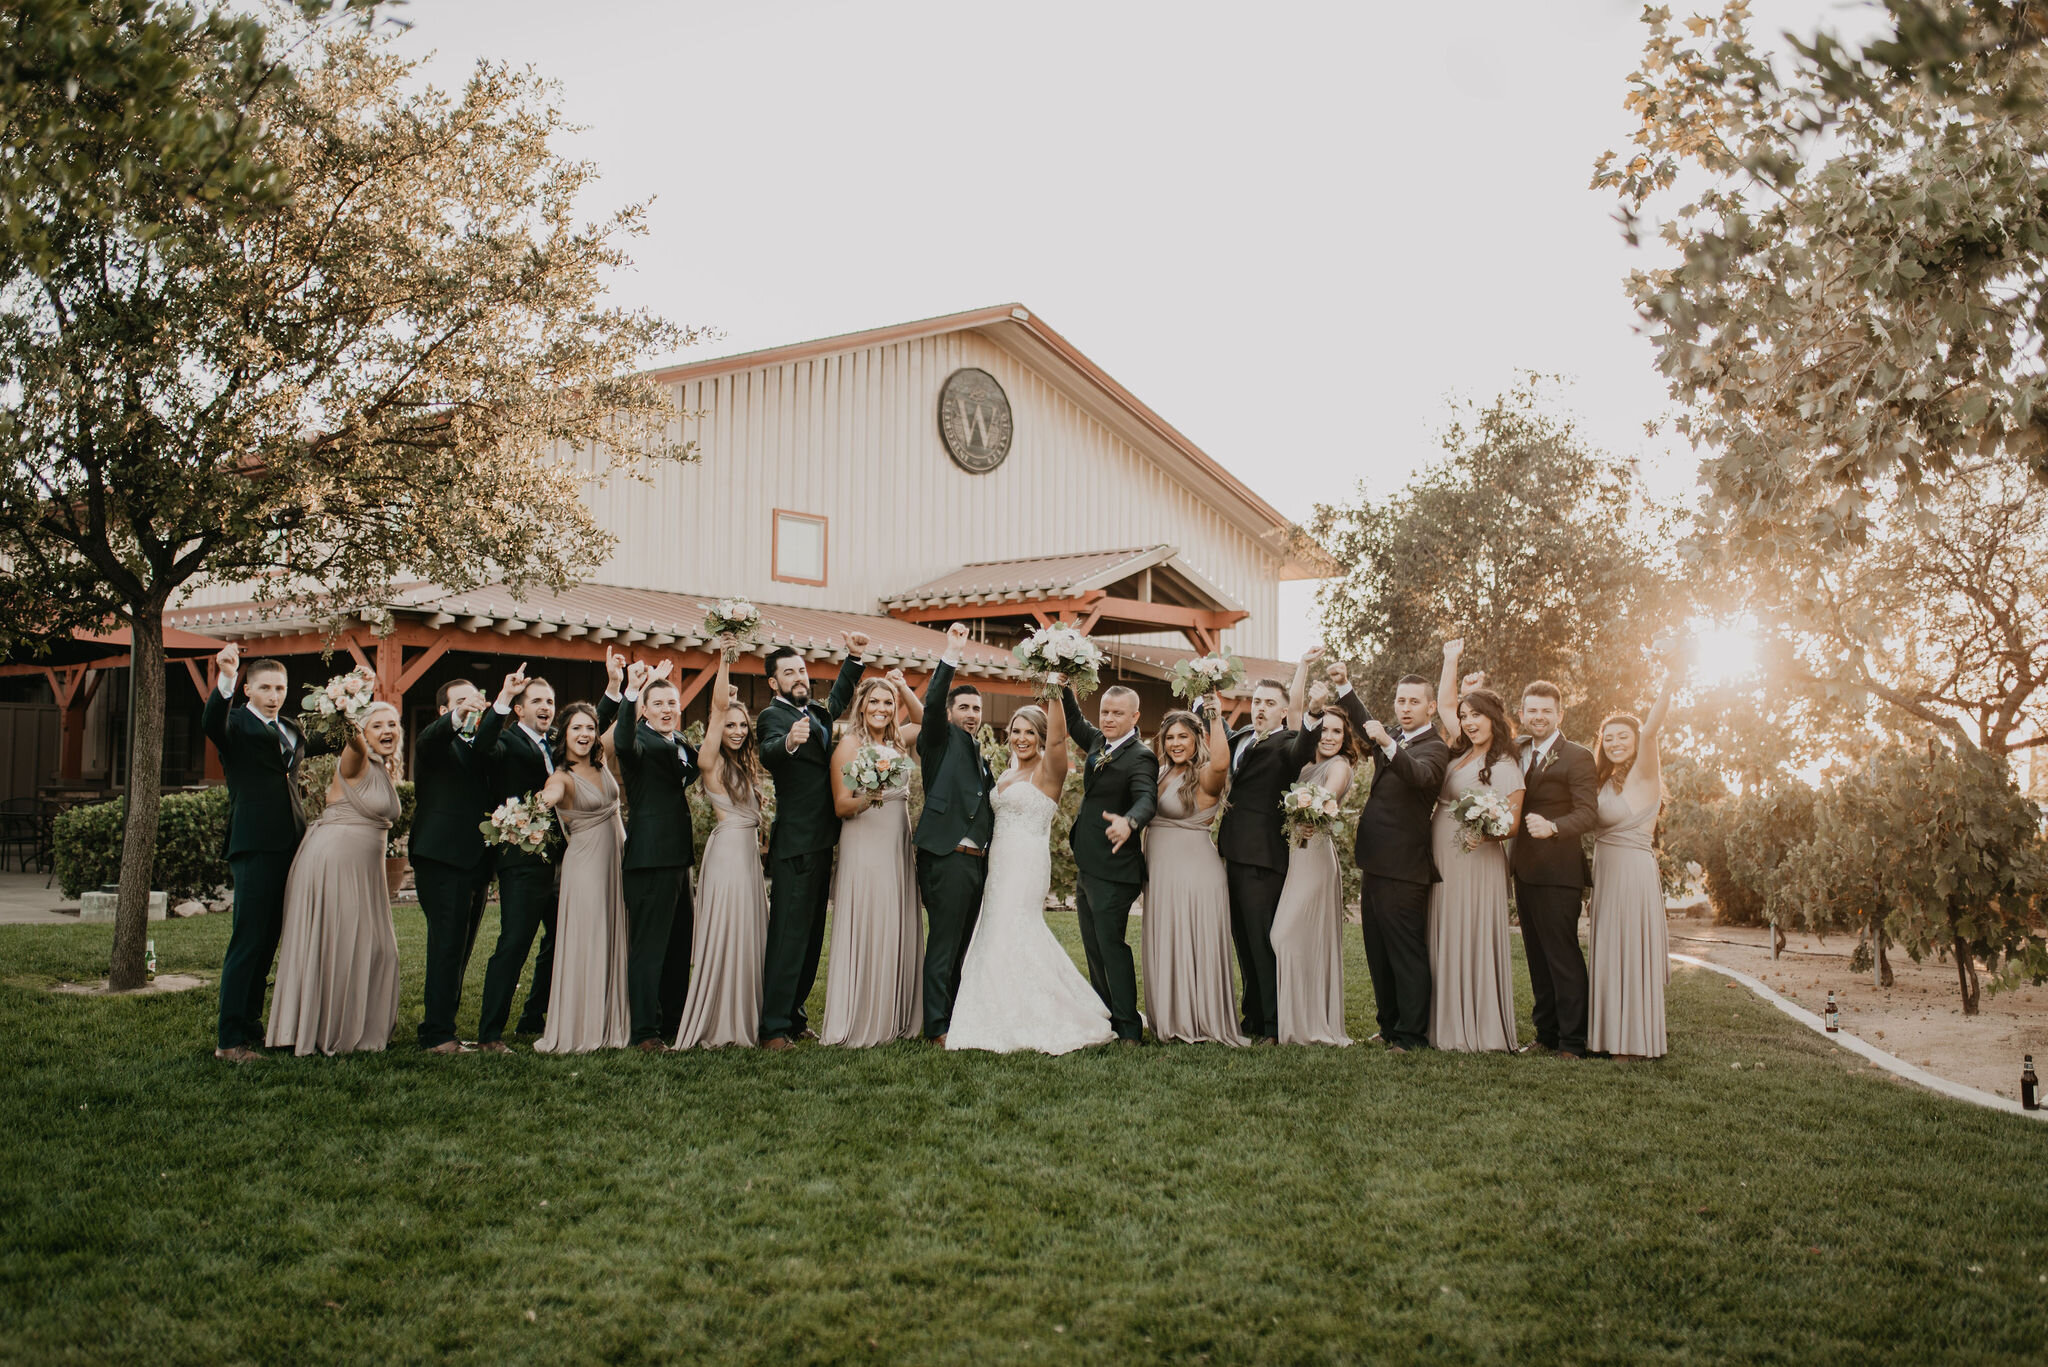 Wedding party posing on grass with Wiens tasting room in background